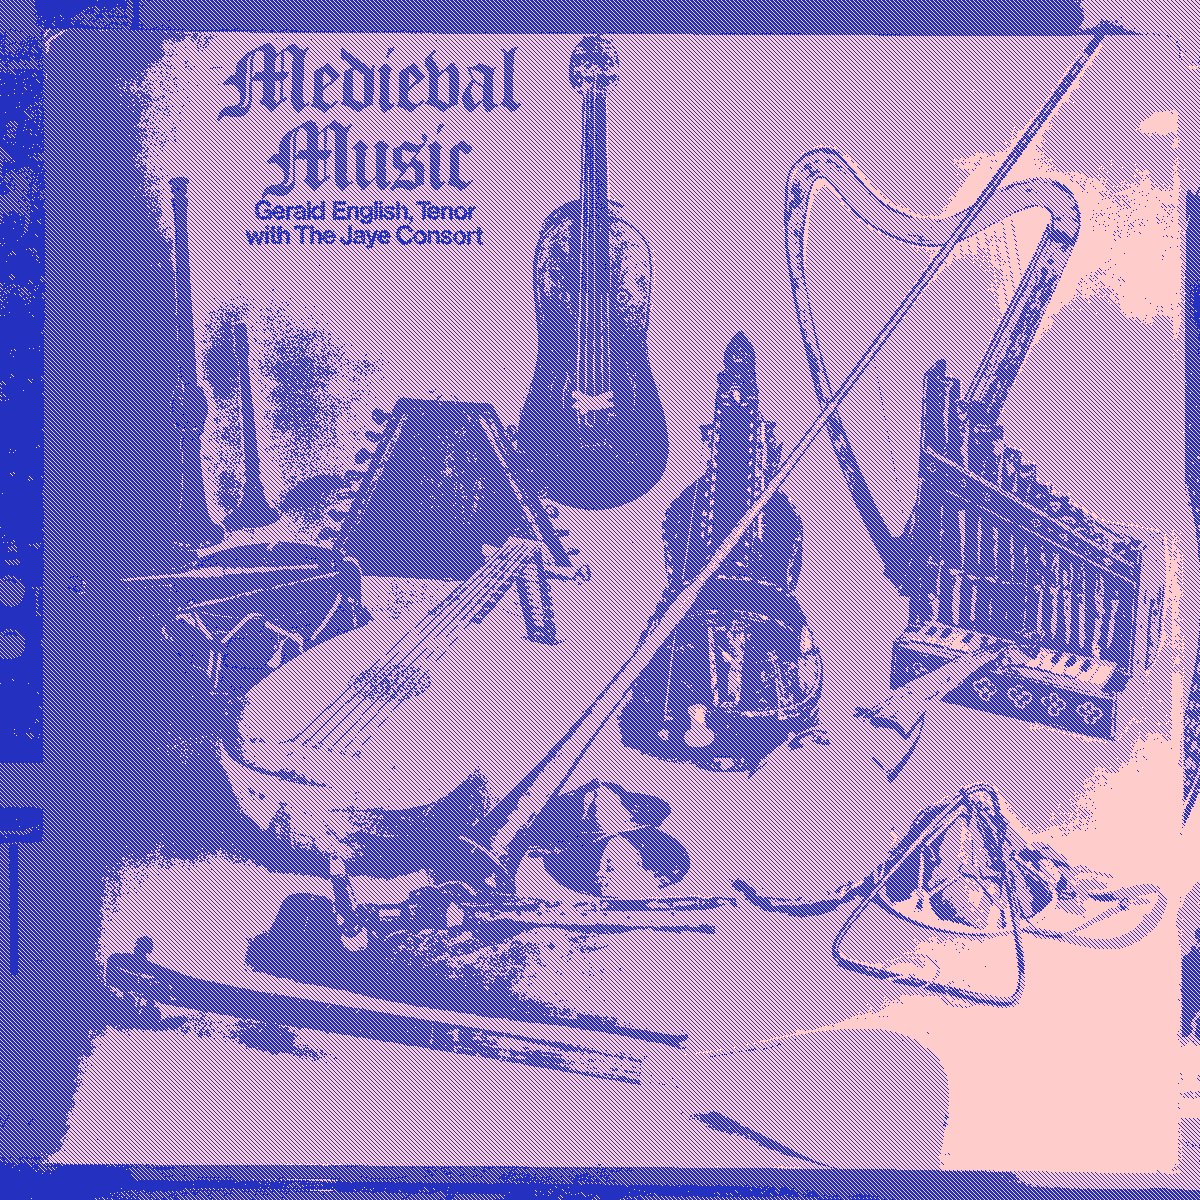 a record cover of medieval music